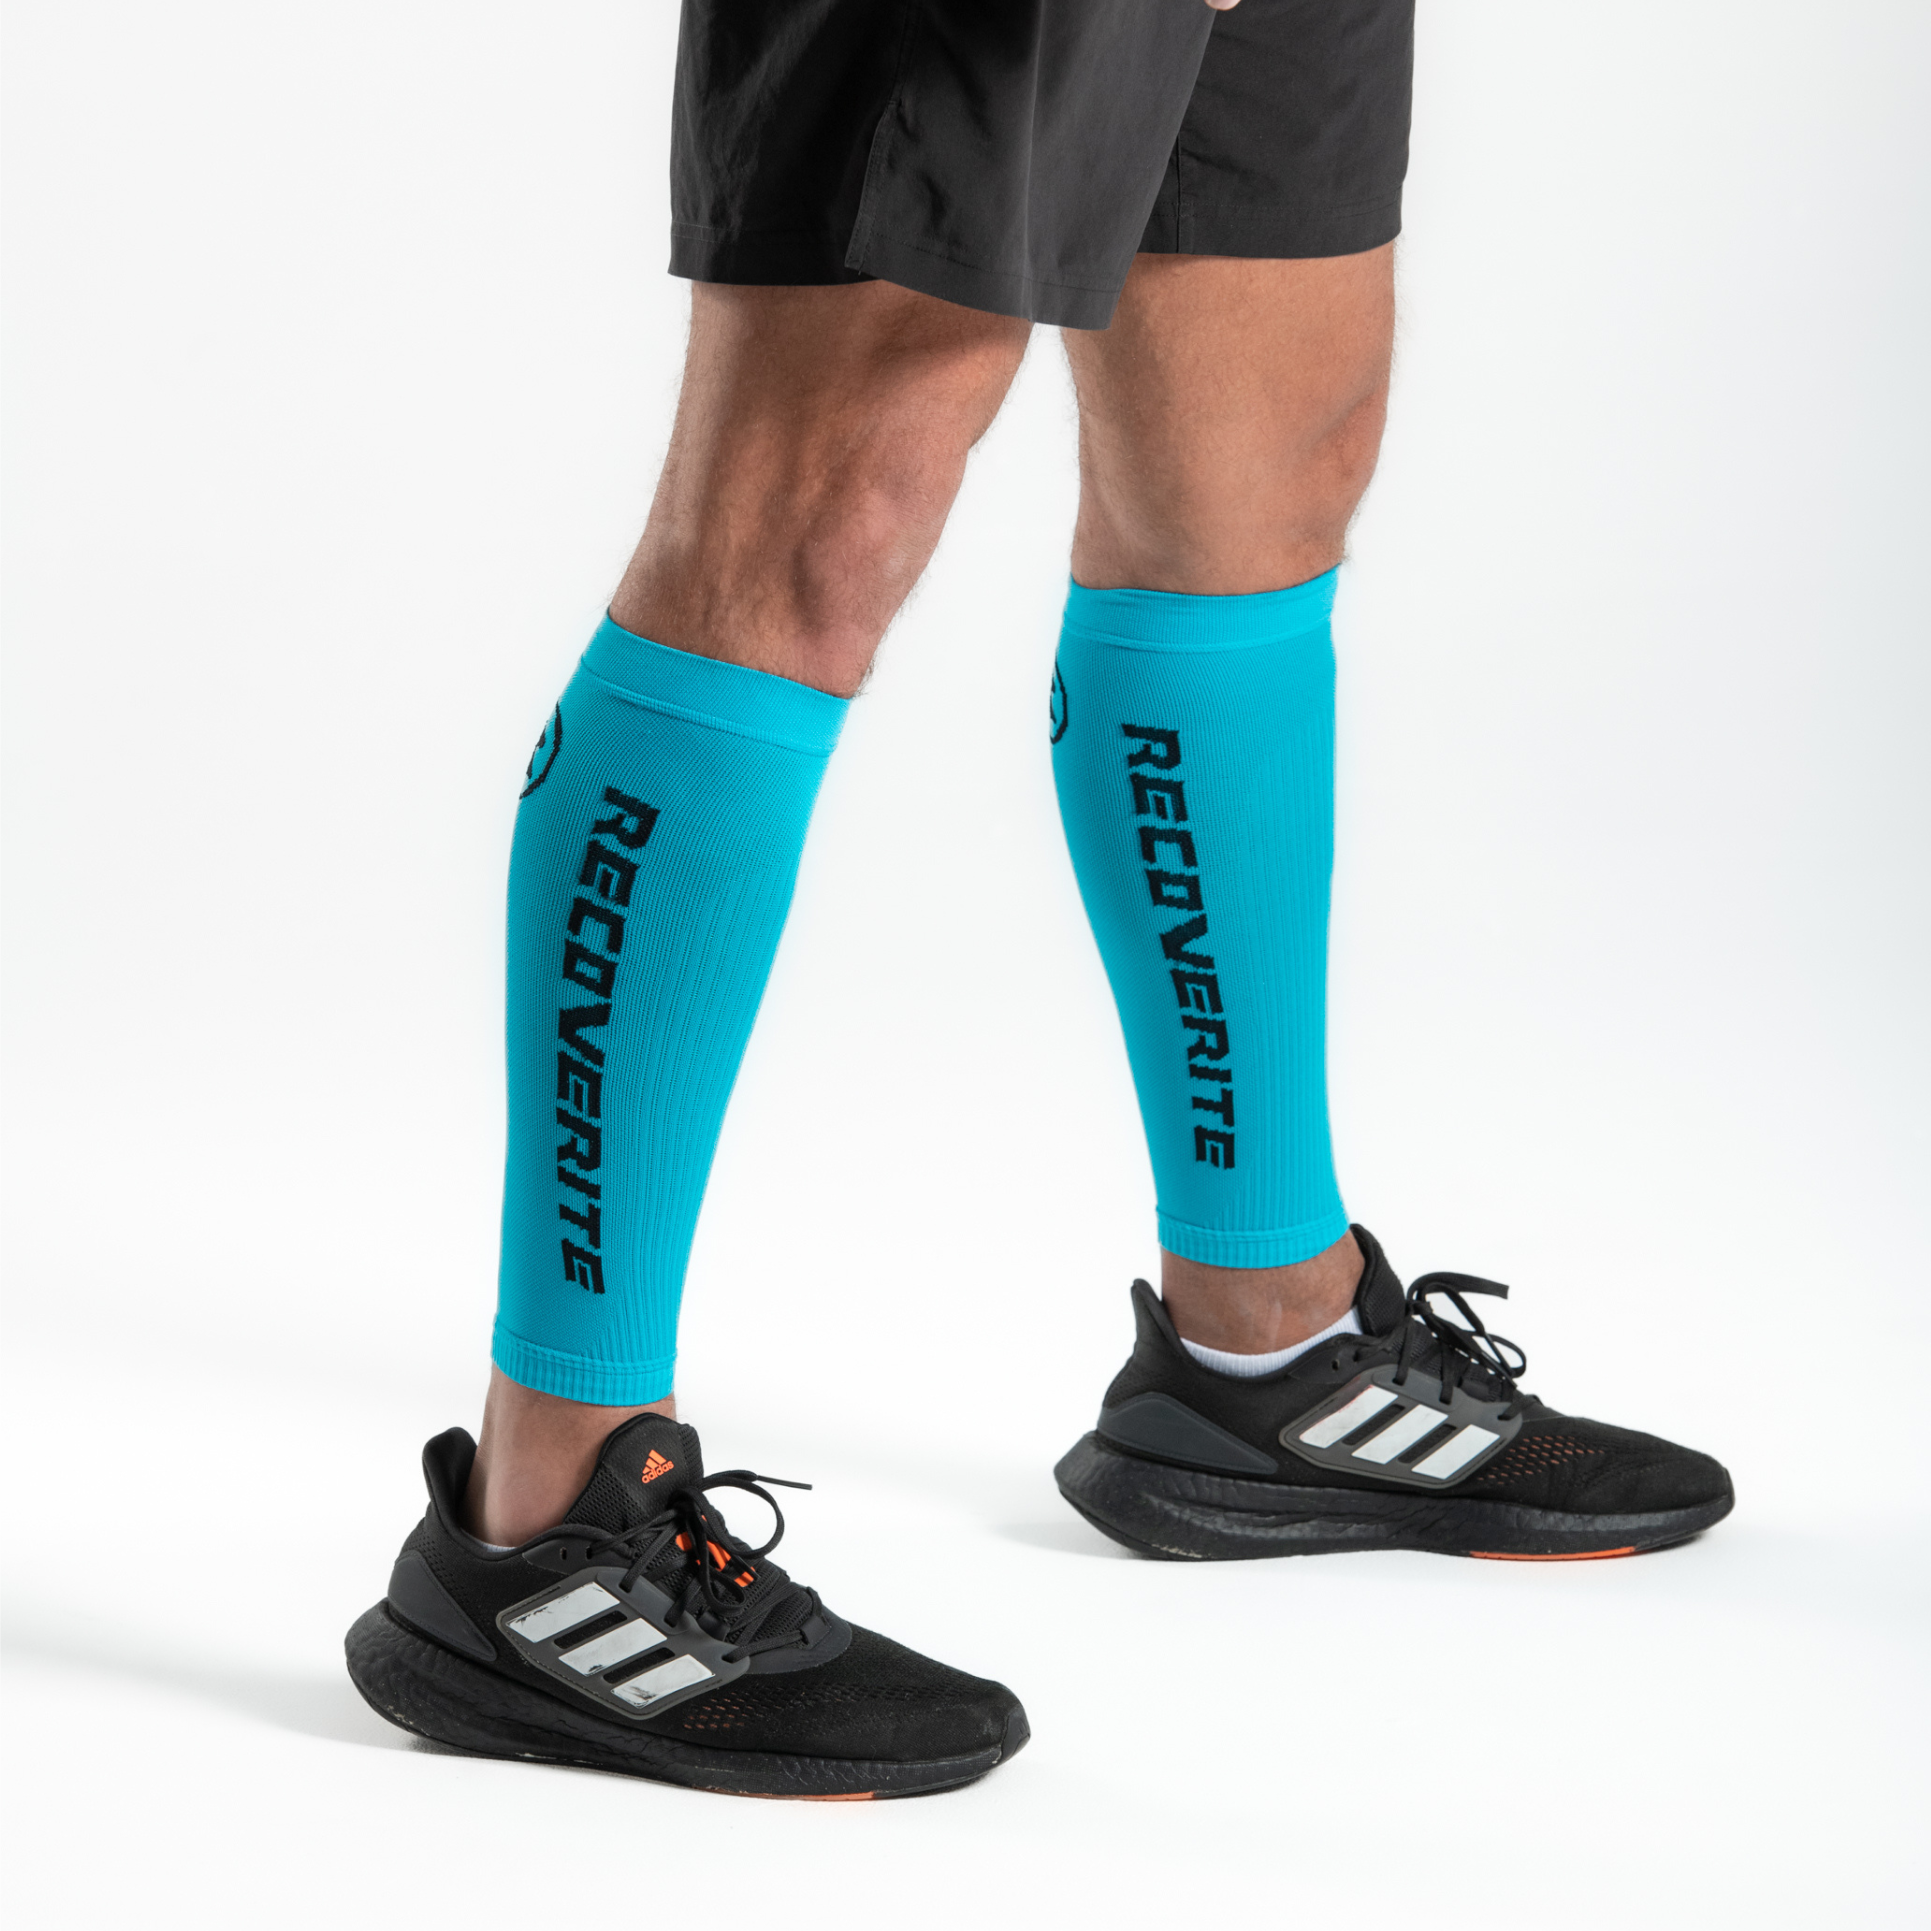 ZARELY, Z3 - Professional Recovery Tights. RECOVER! RESTART! Adult